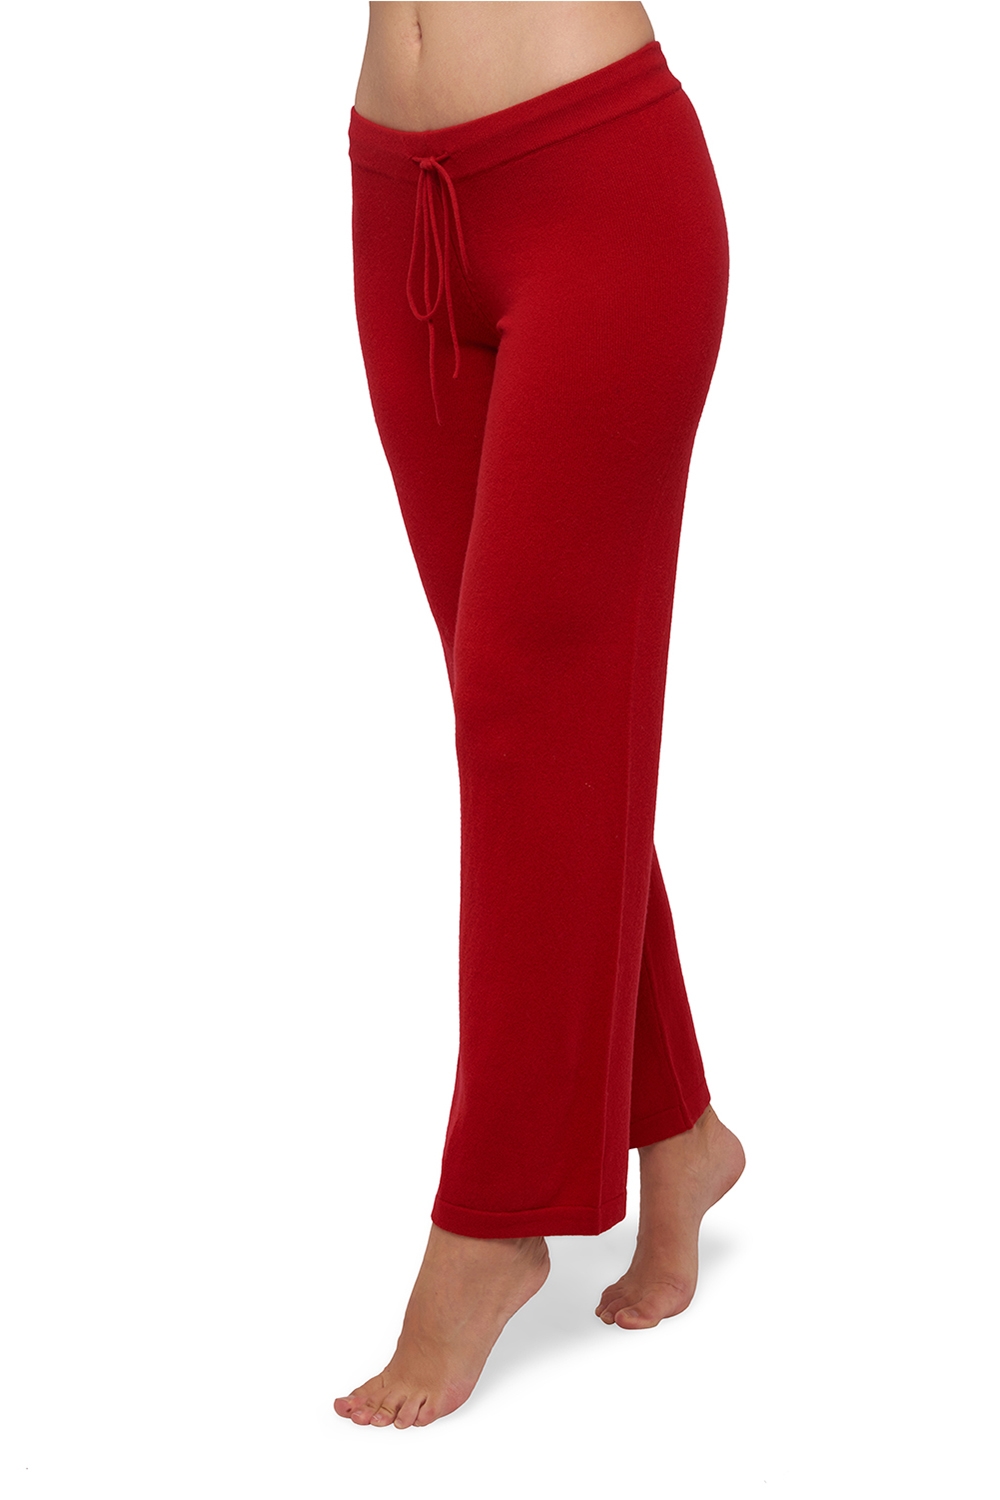 Cashmere ladies cocooning malice blood red l